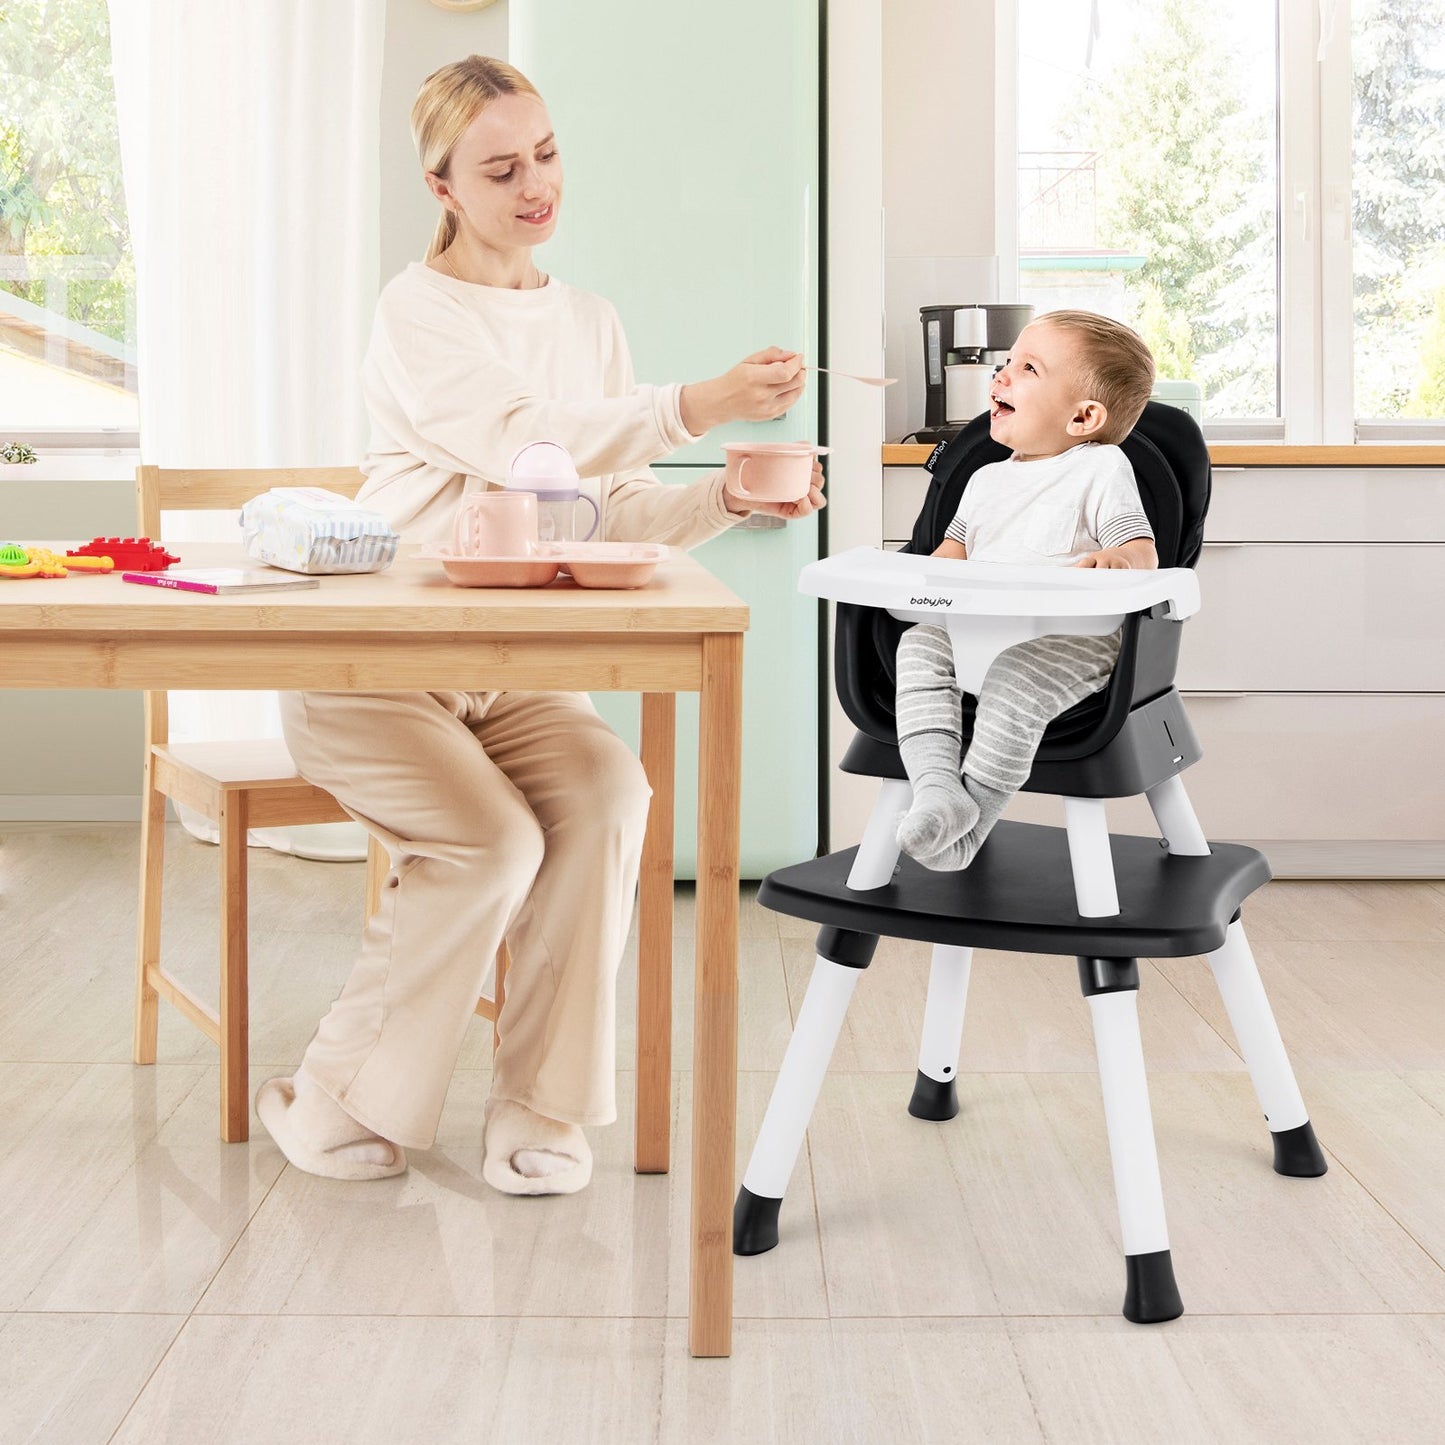 6-in-1 Convertible Baby High Chair with Adjustable Removable Tray, Black at Gallery Canada